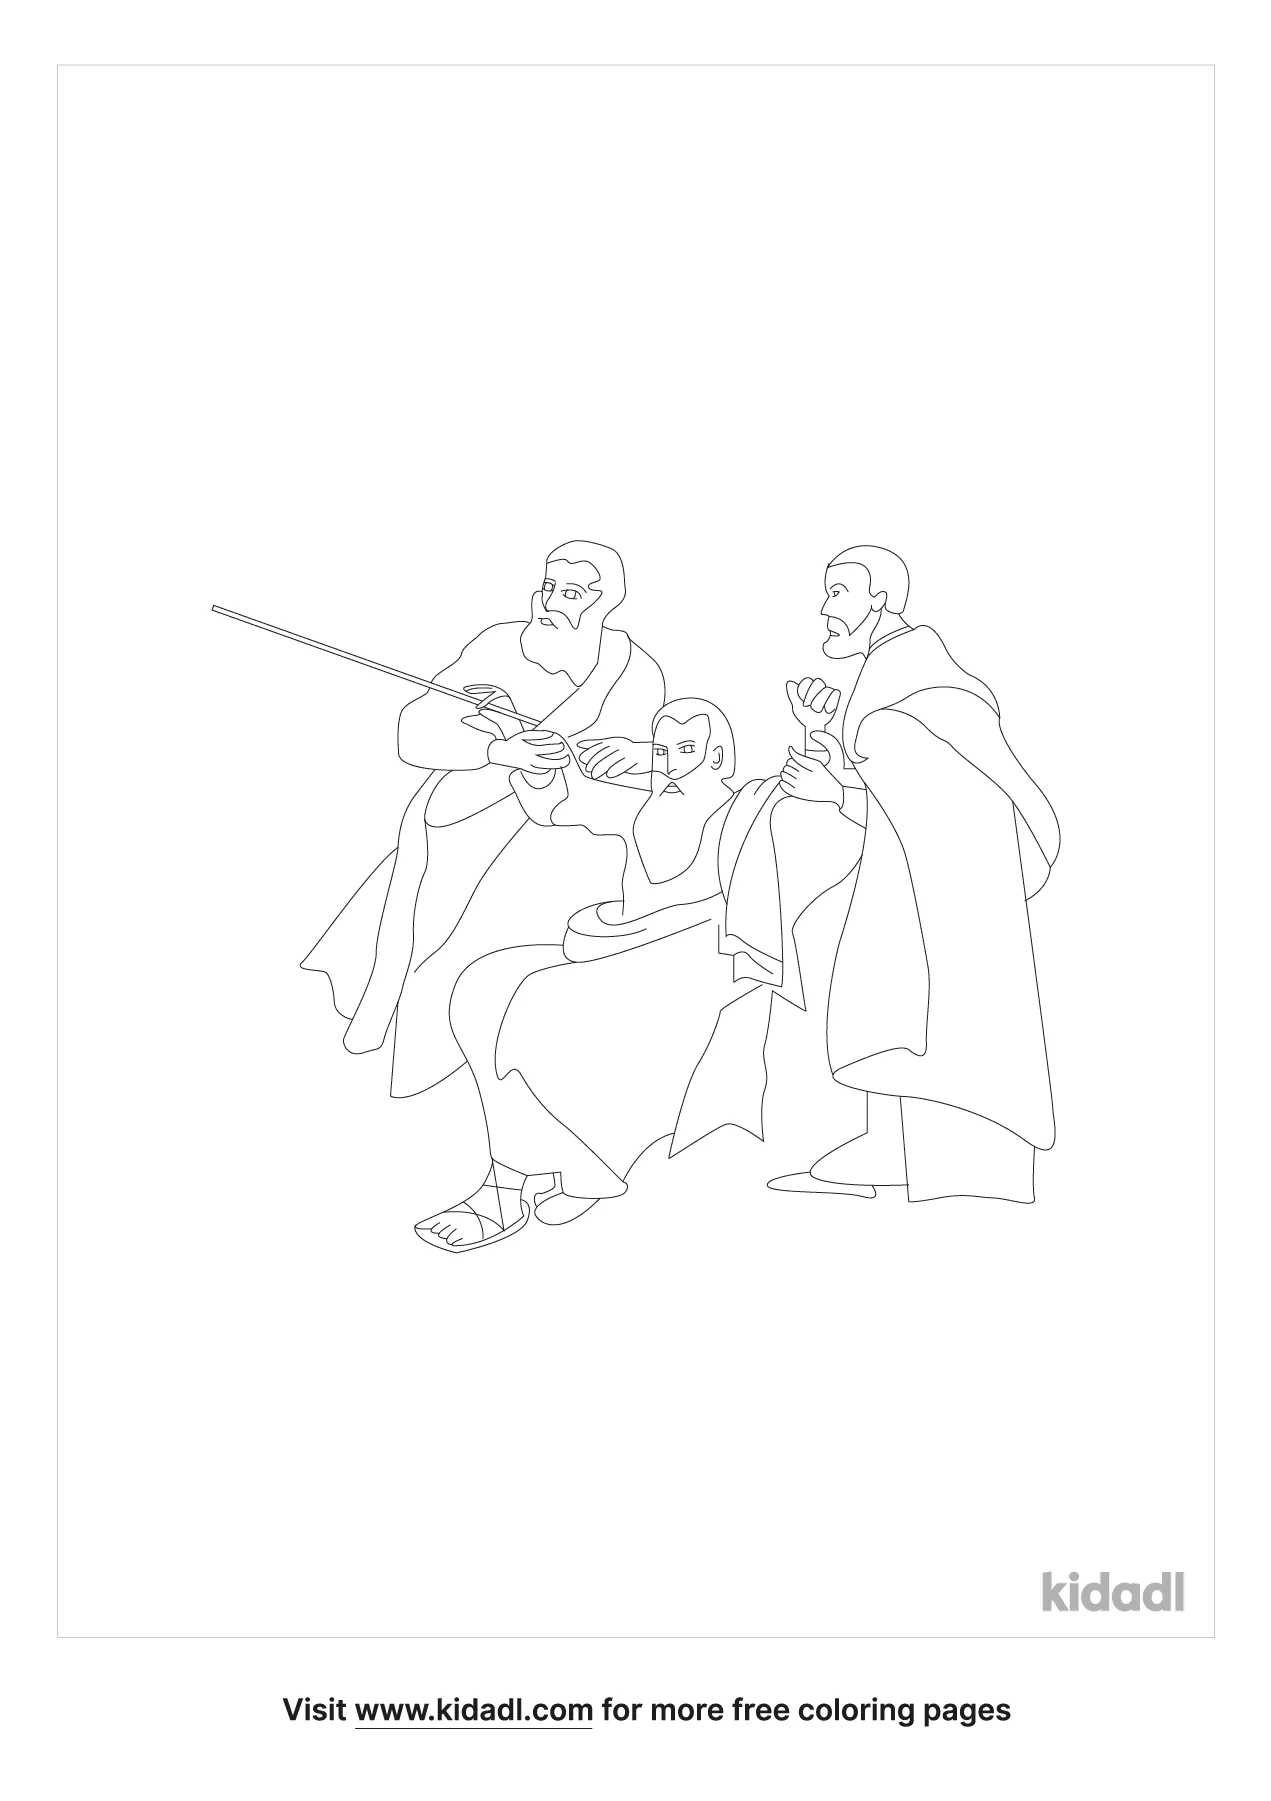 Moses Holds Up His Hands Coloring Page